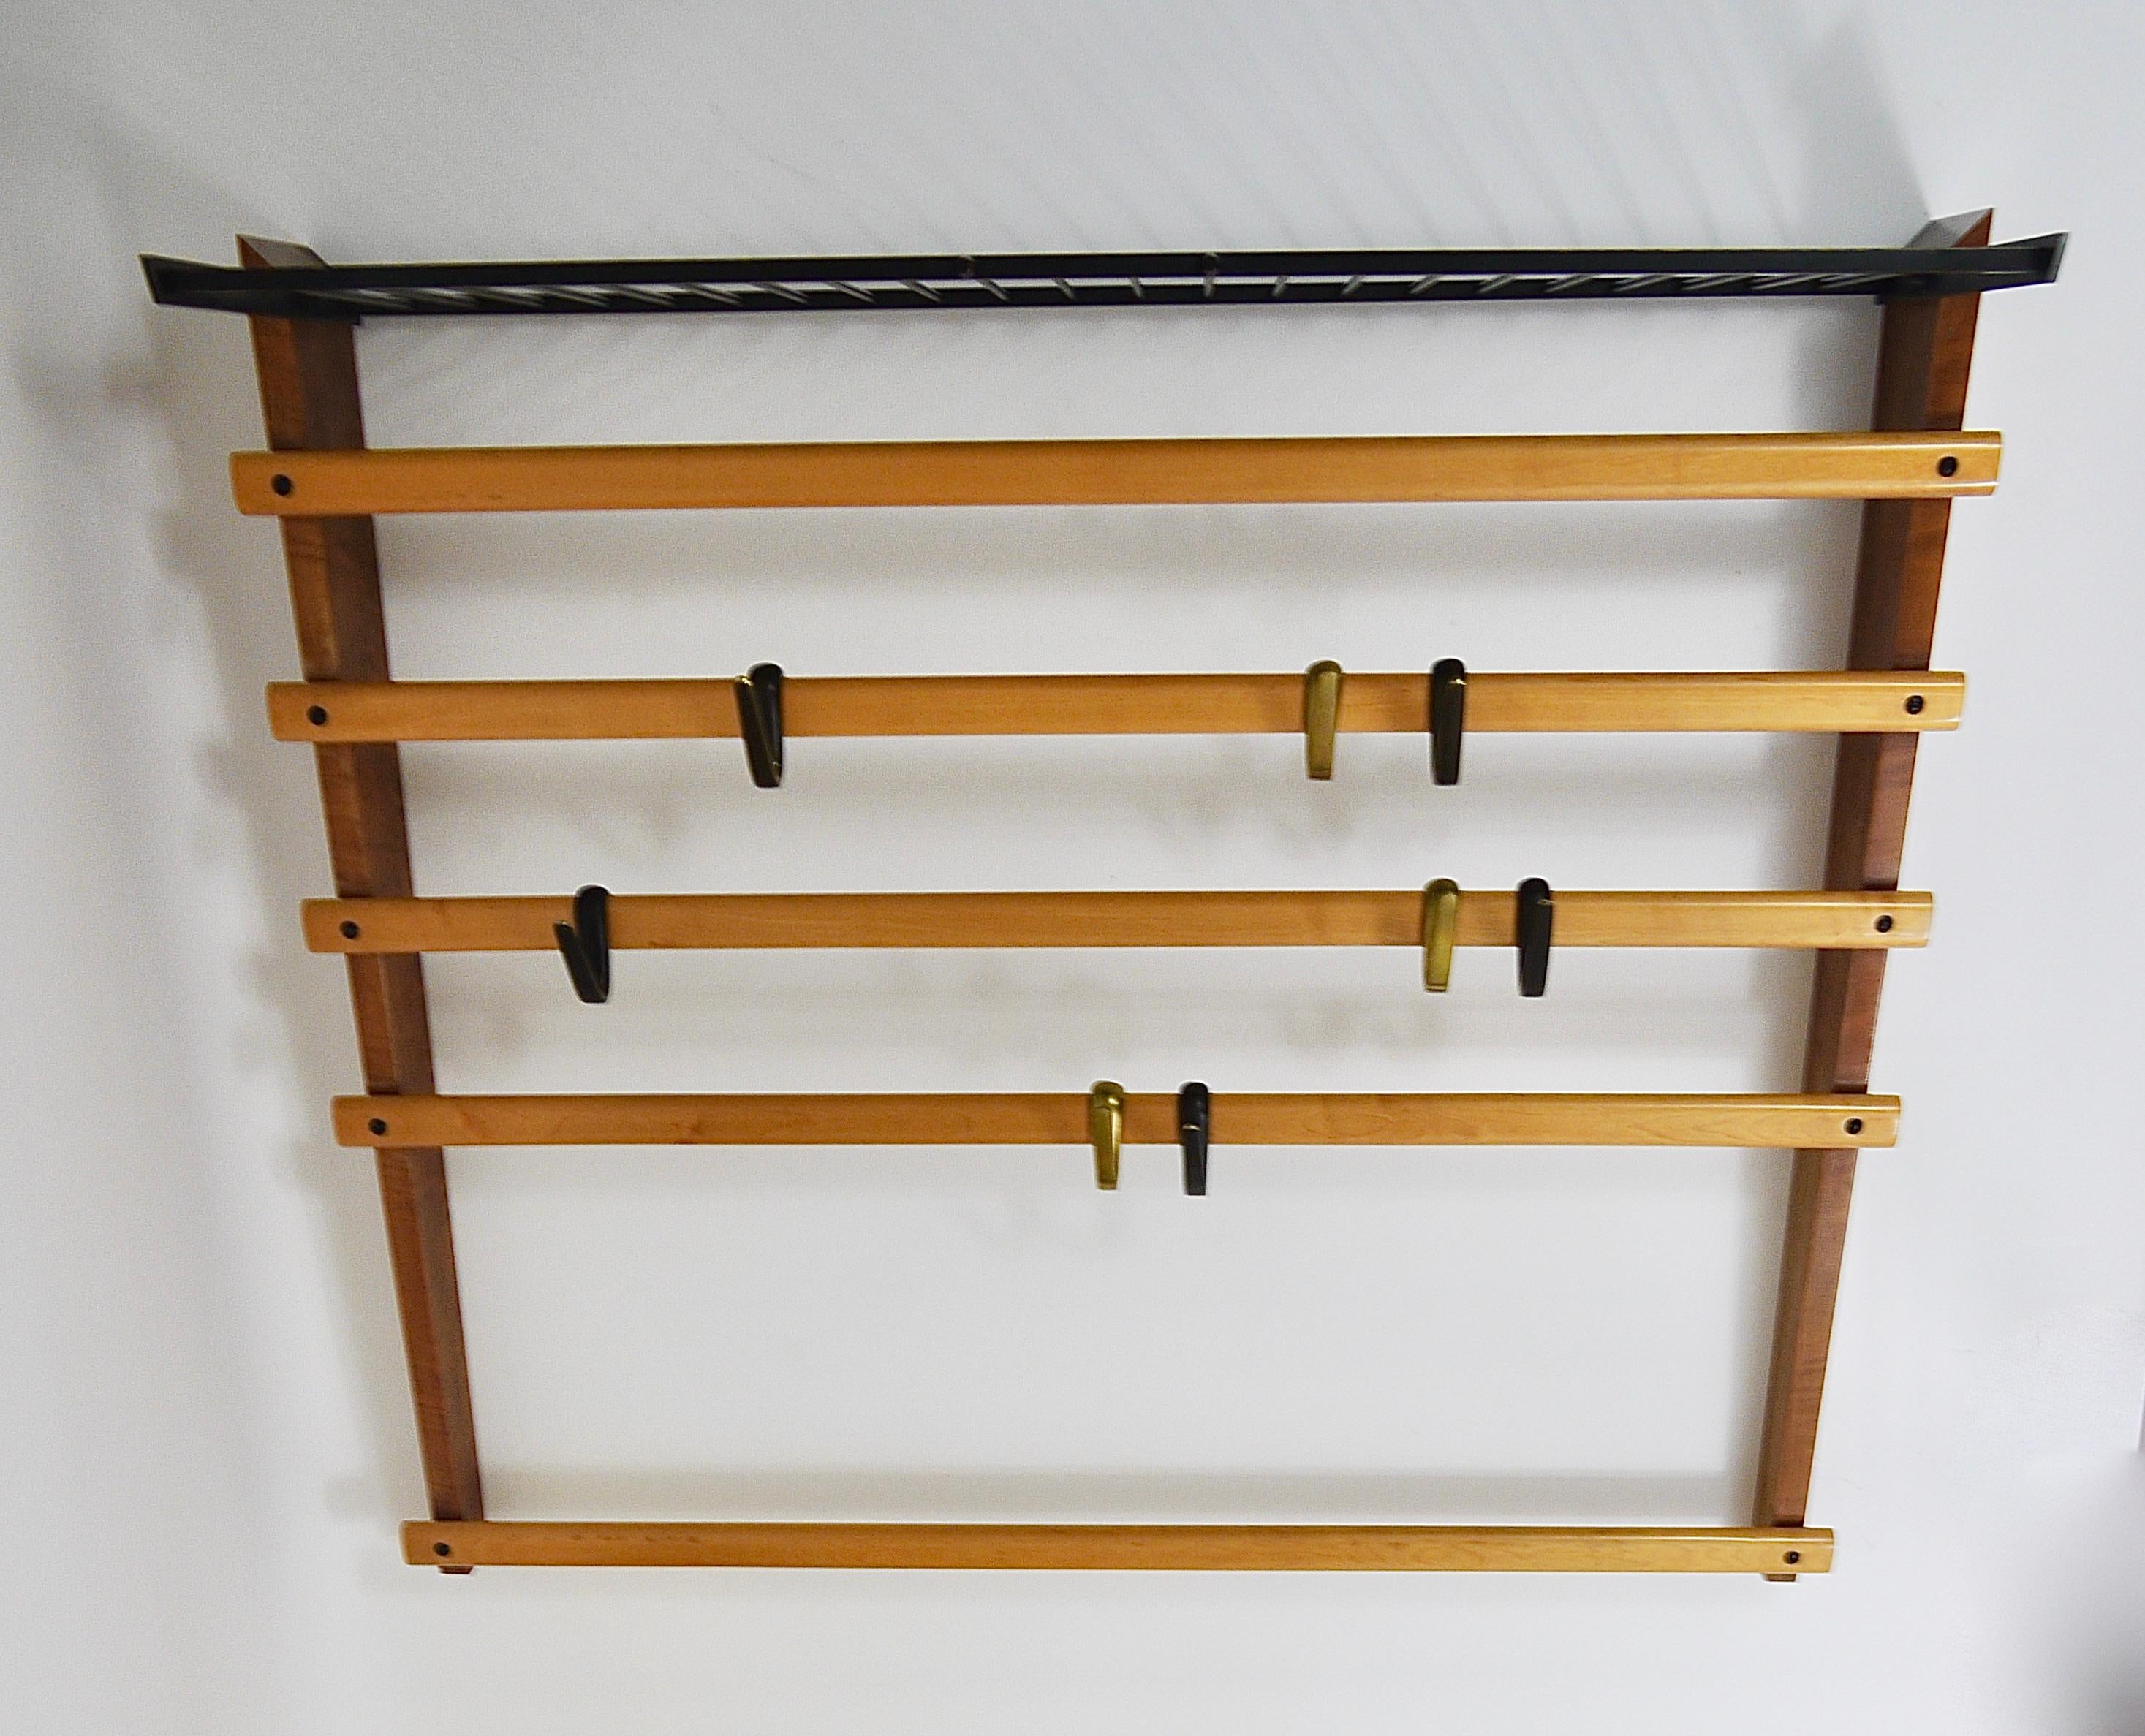 Patinated Rare Carl Auböck Coat Rack With Hat Rack, Wardrobe, Brass, Walnut & Beech, 1950s For Sale